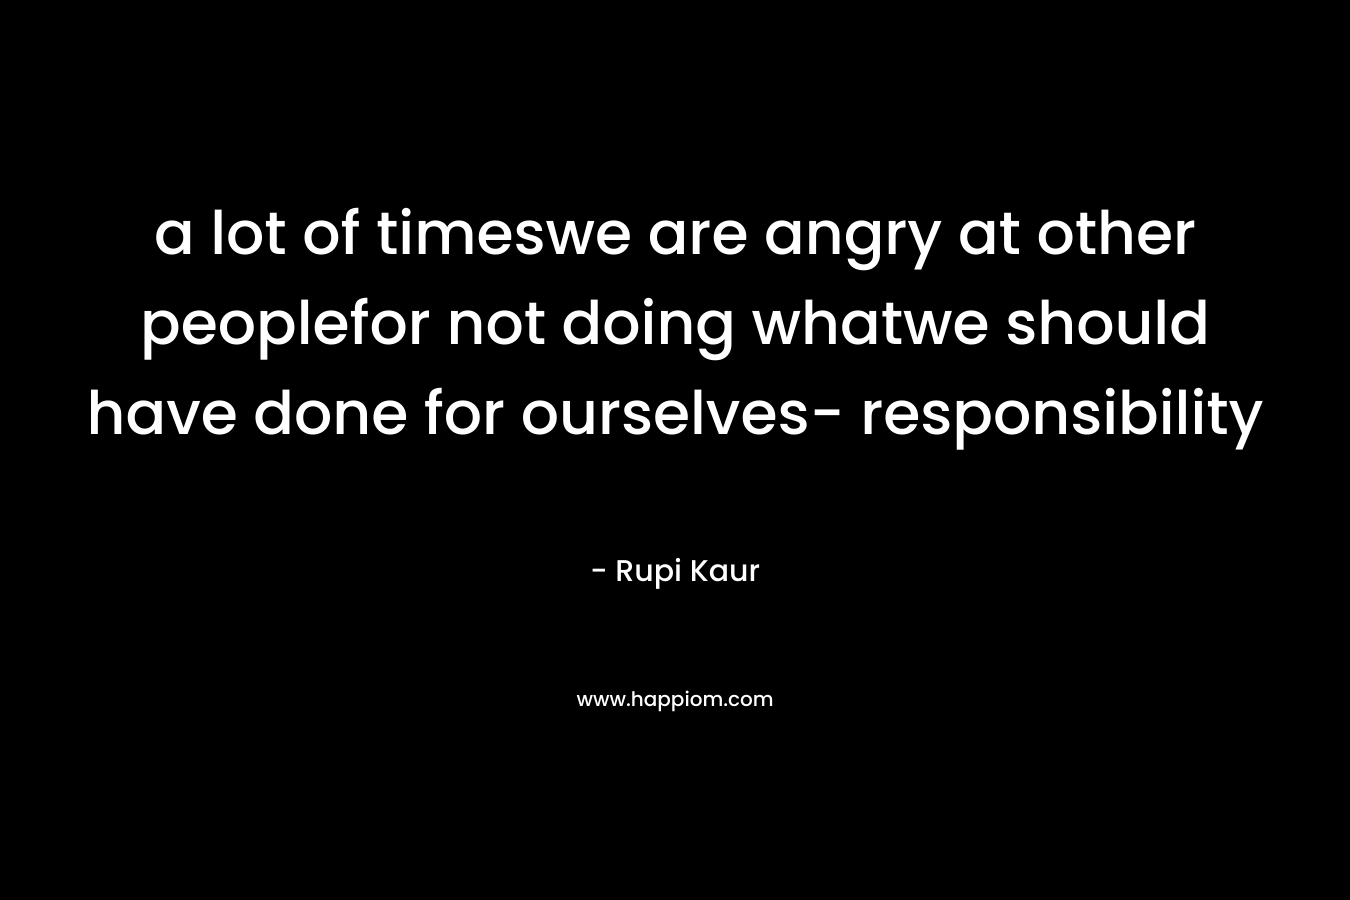 a lot of timeswe are angry at other peoplefor not doing whatwe should have done for ourselves- responsibility